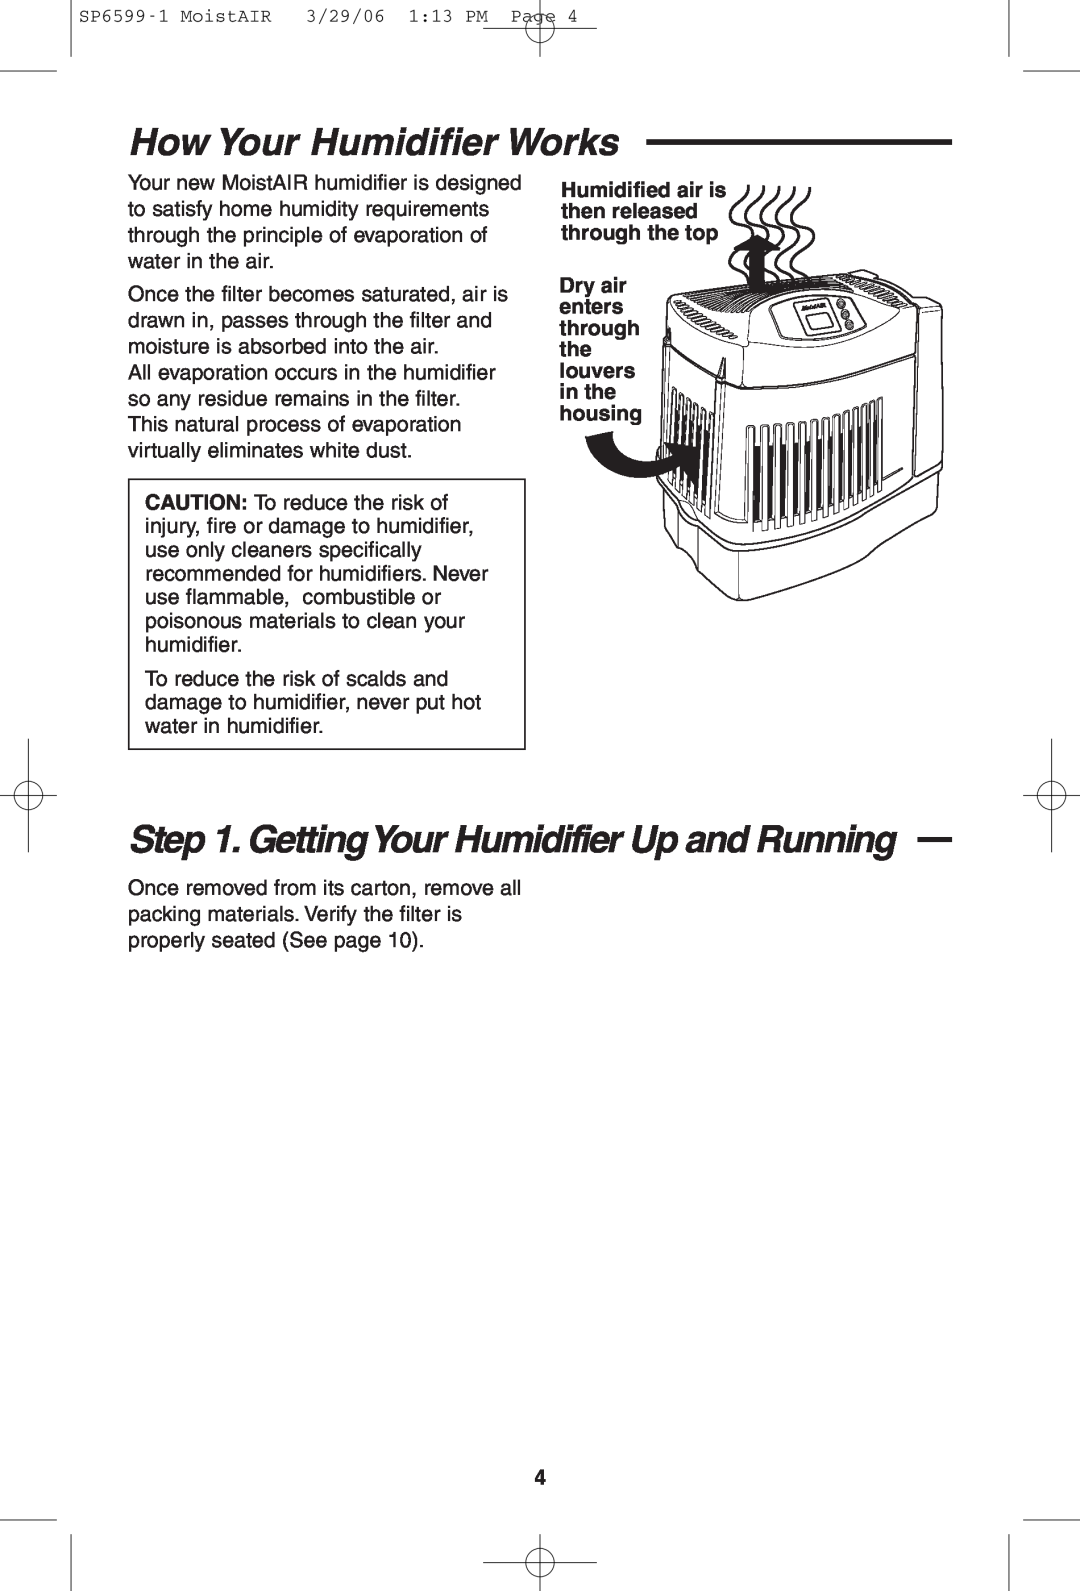 MoistAir MA 0800 0 owner manual How Your Humidifier Works, GettingYour Humidifier Up and Running 